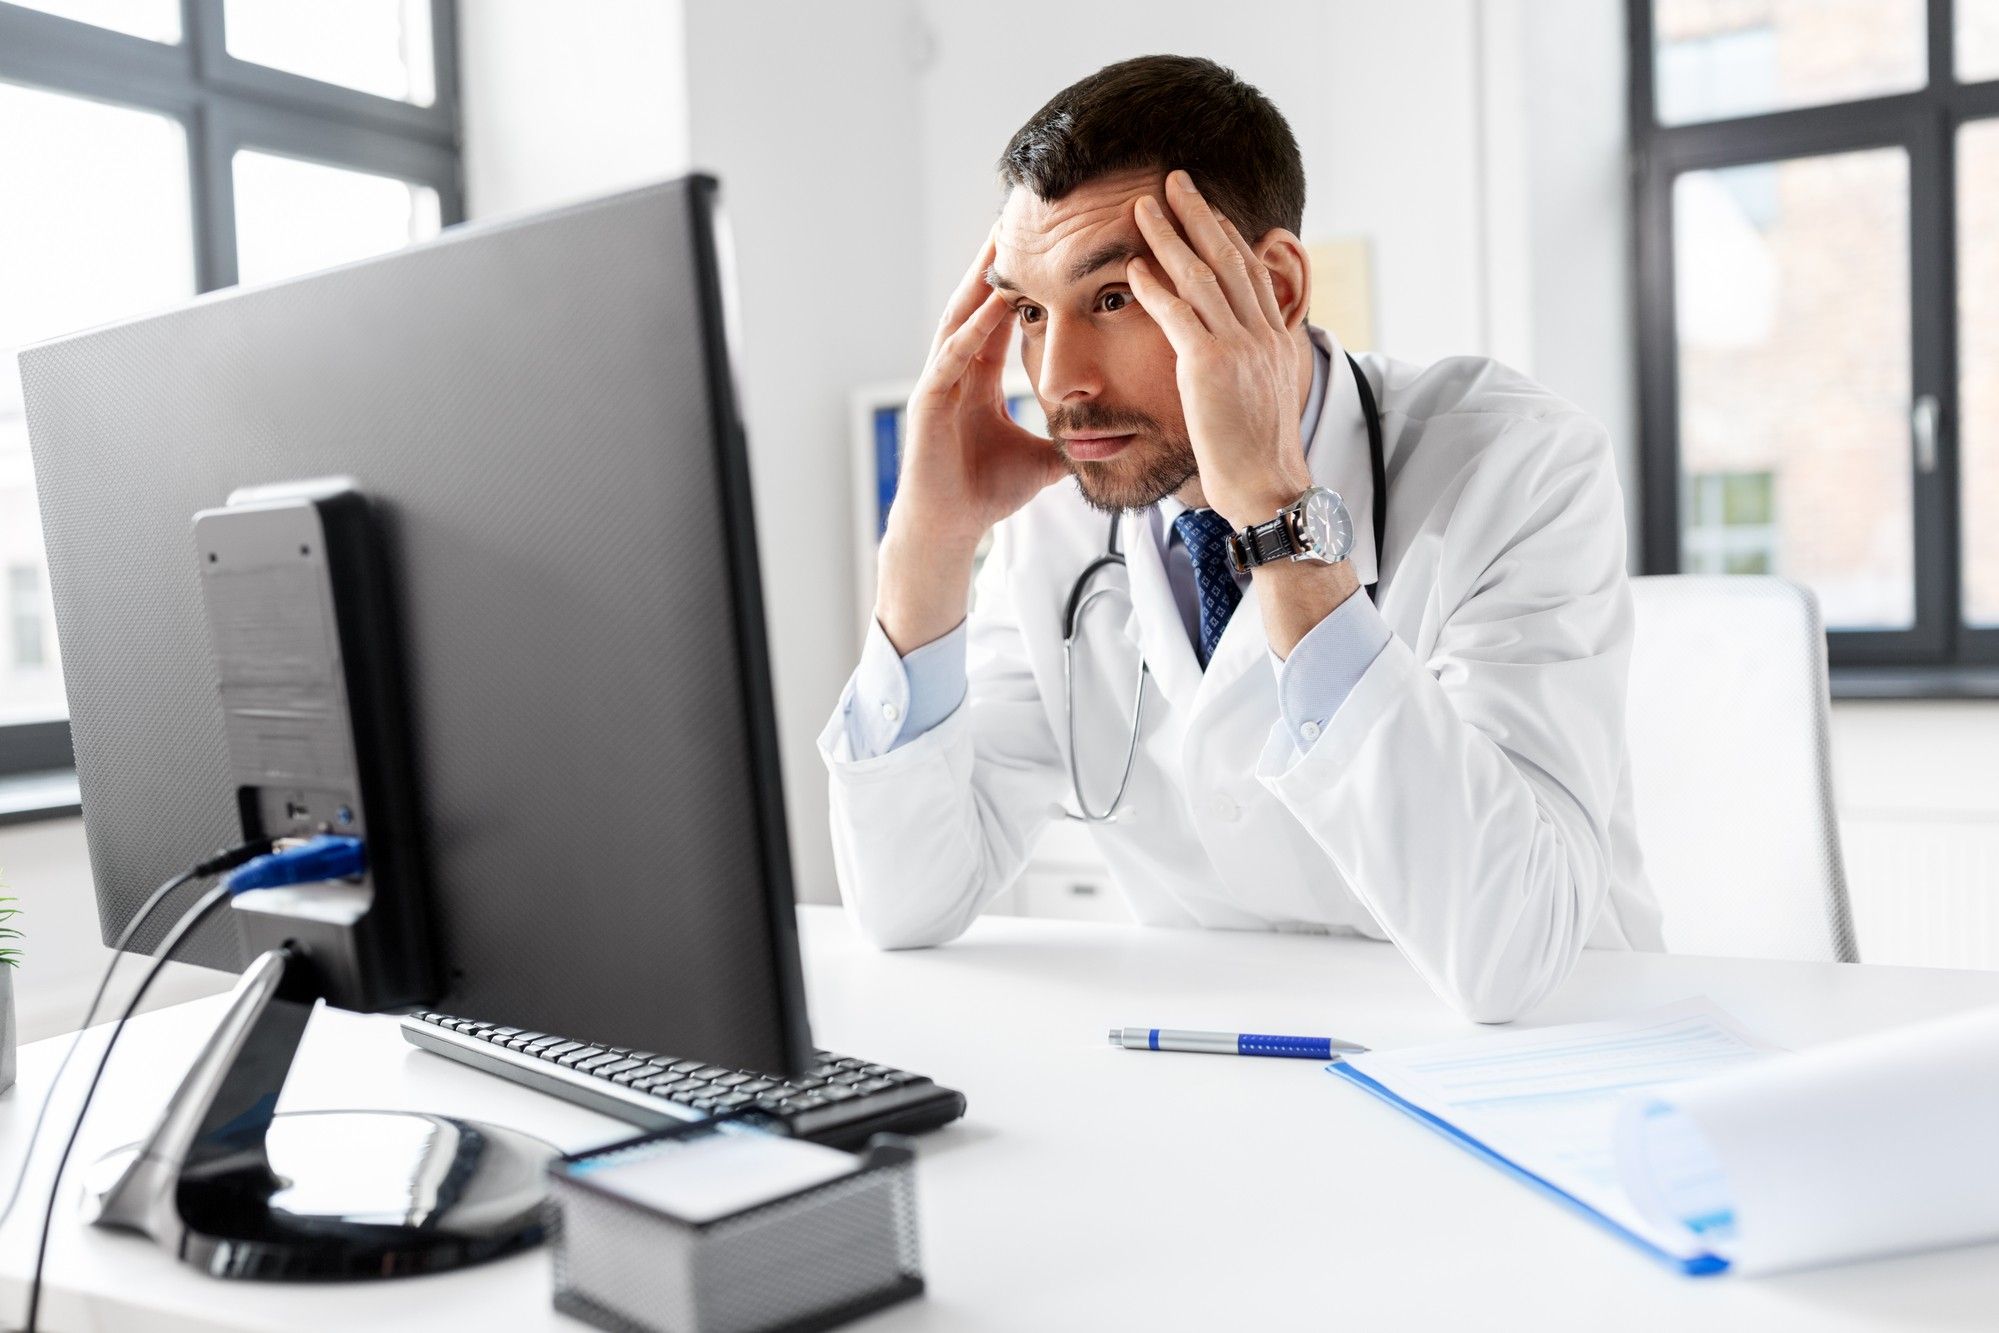 Stressed doctor realizing there's a data breach regarding the CarePartners class action lawsuit 